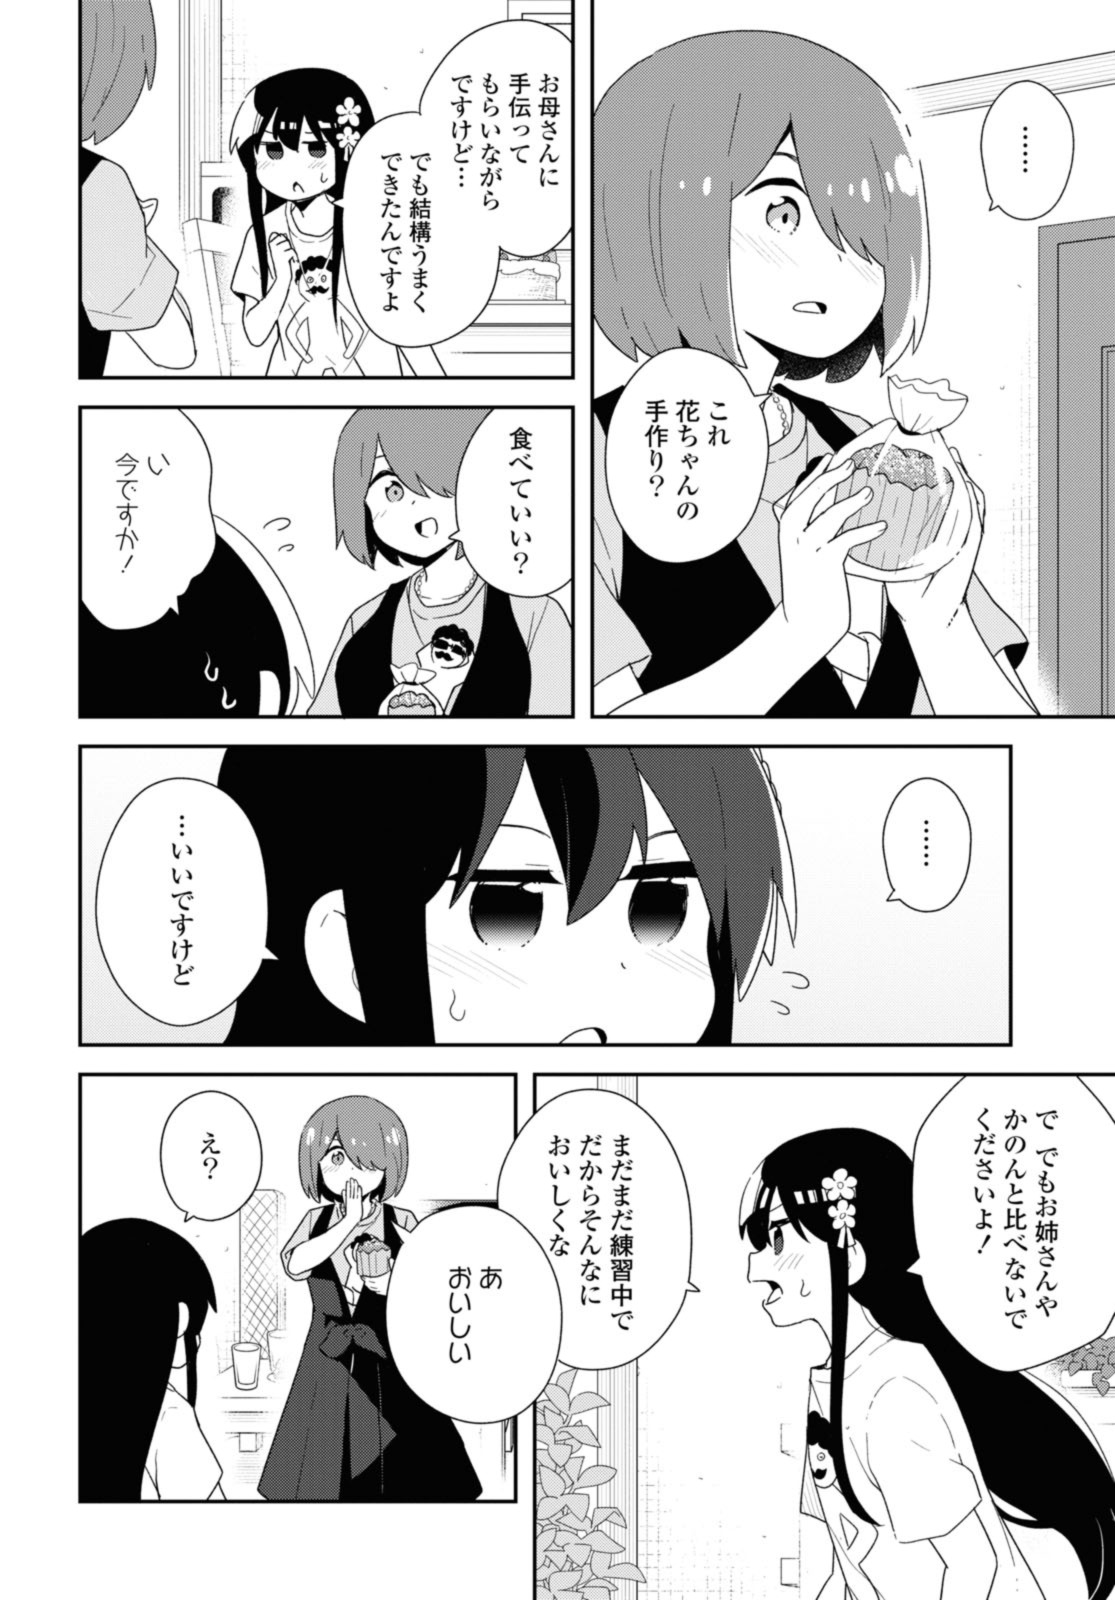 Wataten! An Angel Flew Down to Me 私に天使が舞い降りた！ 第100.2話 - Page 8